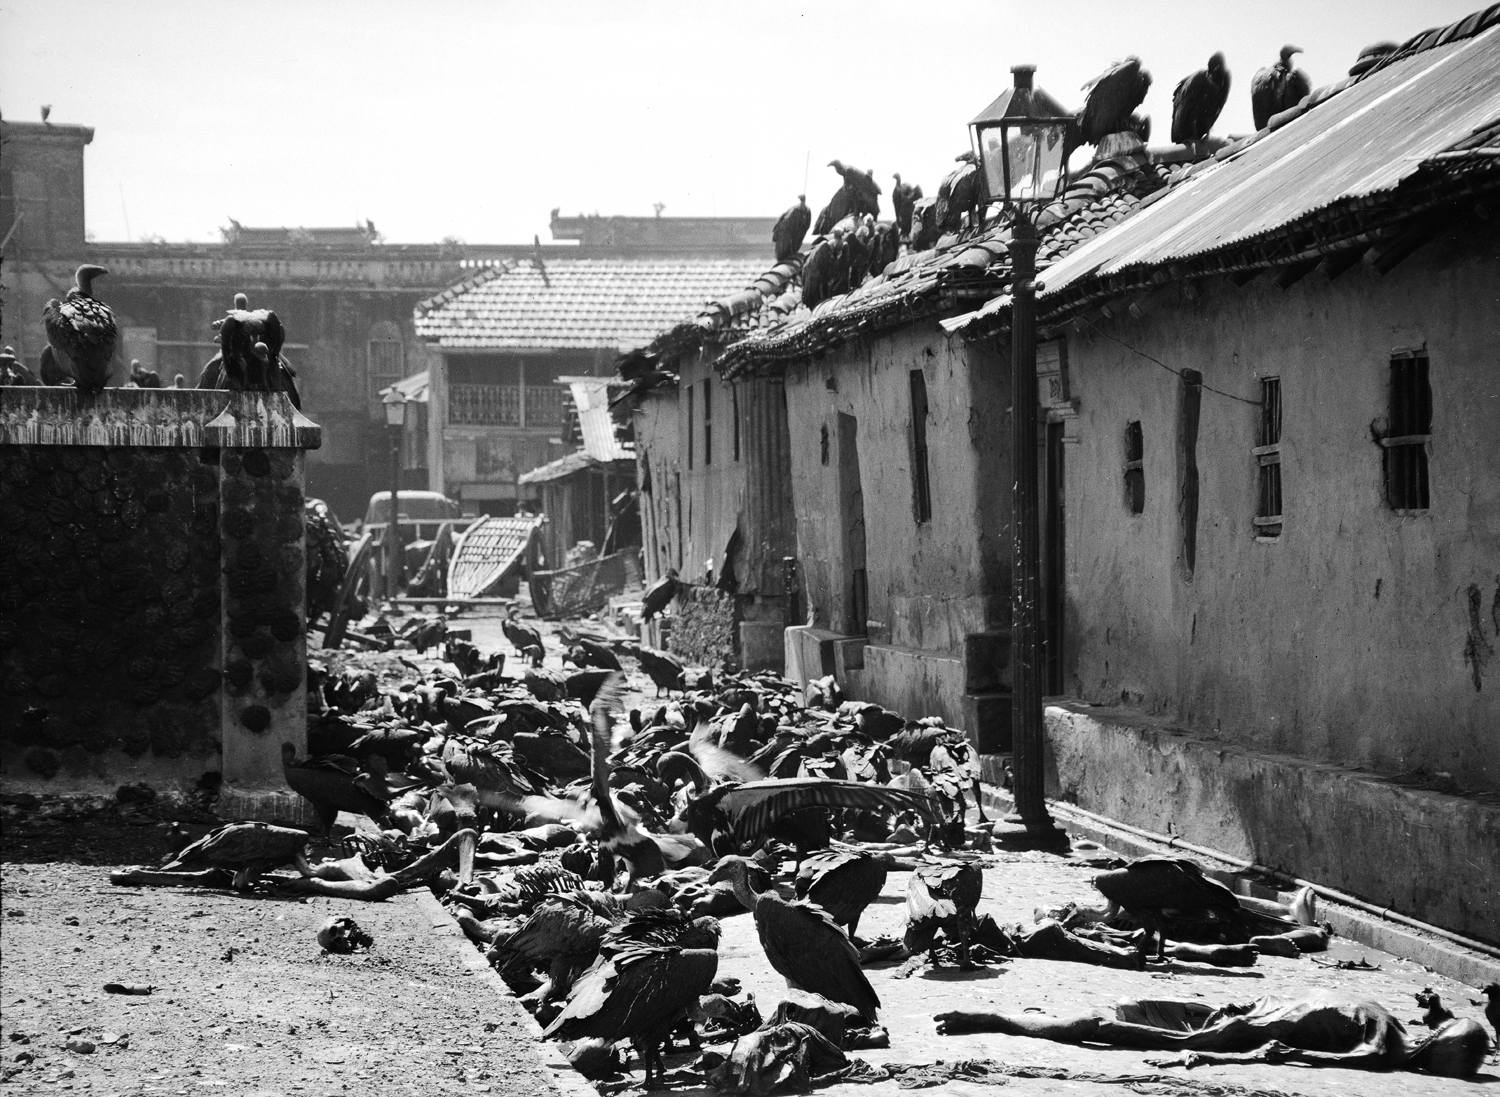 "Carrion birds feast on victims of bloody religious riot in India." (Calcutta, 1946)